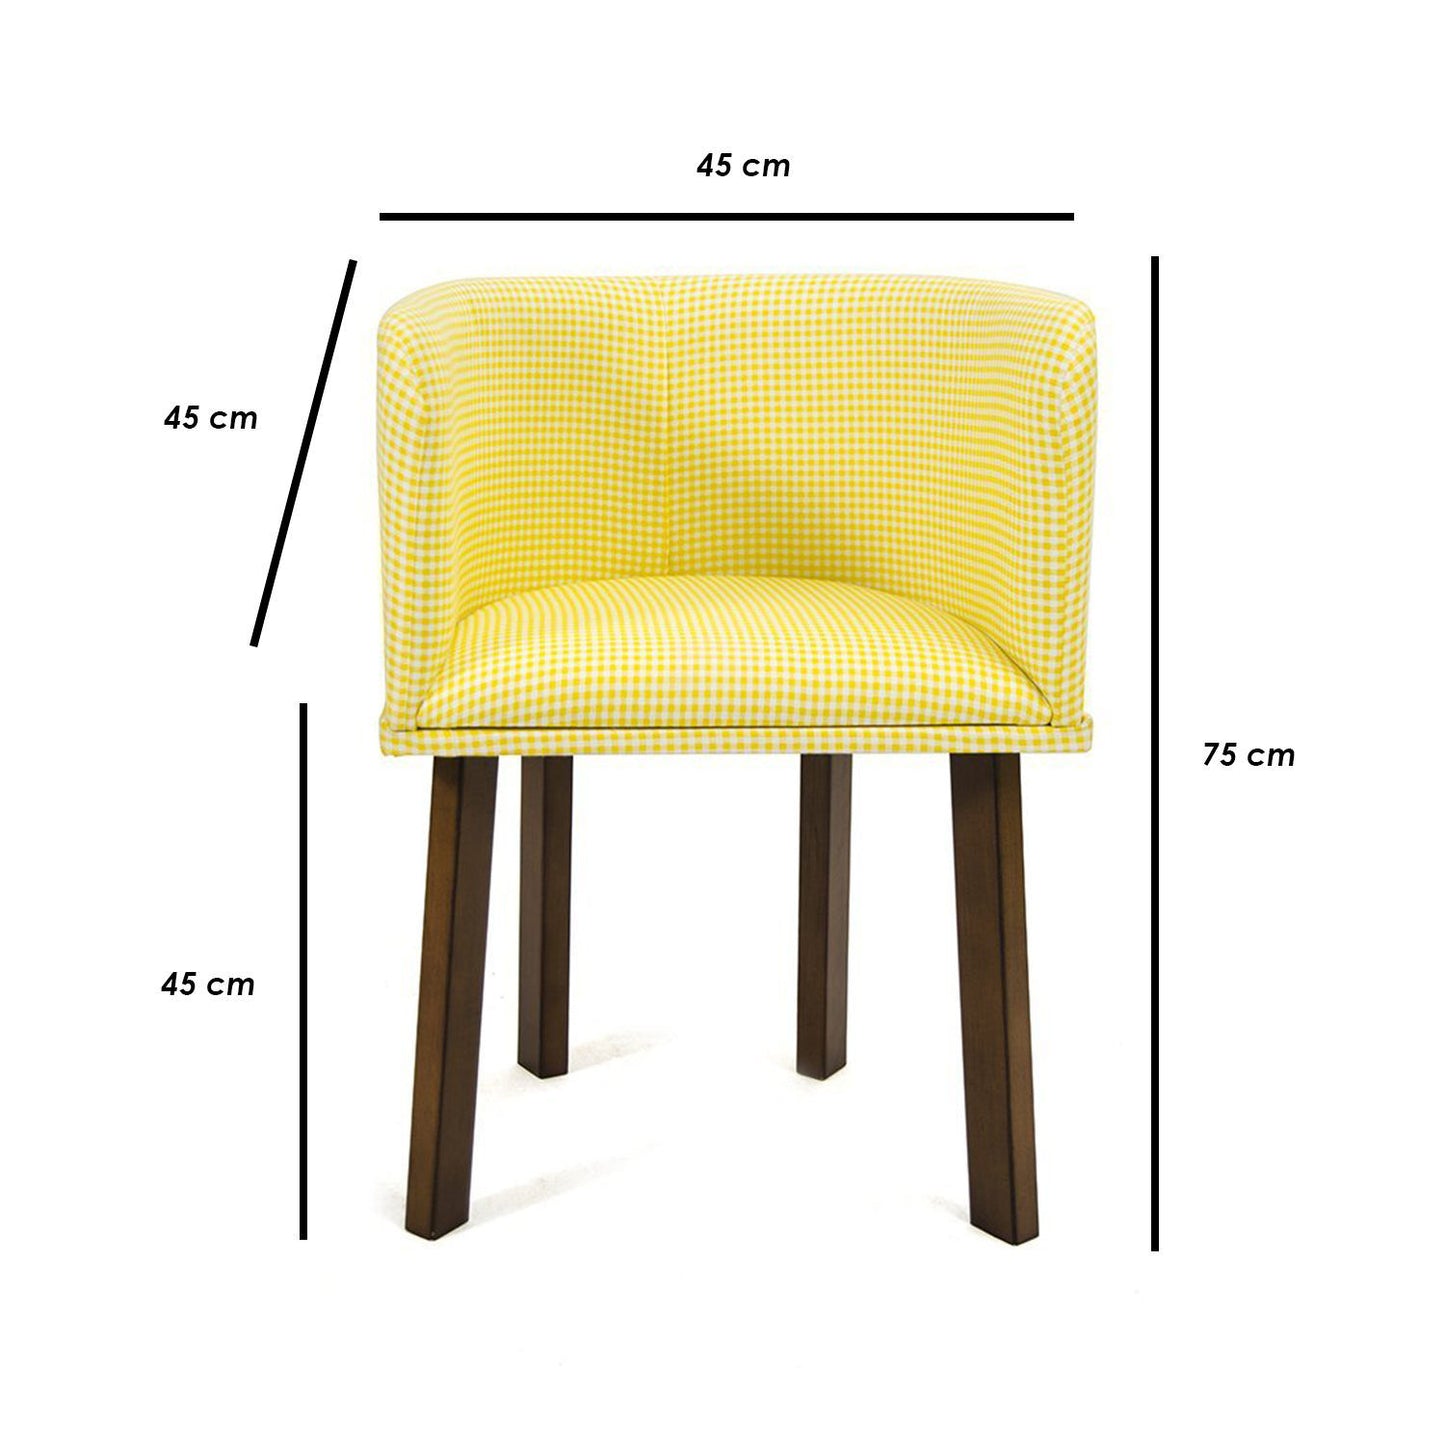 Plung - Chair